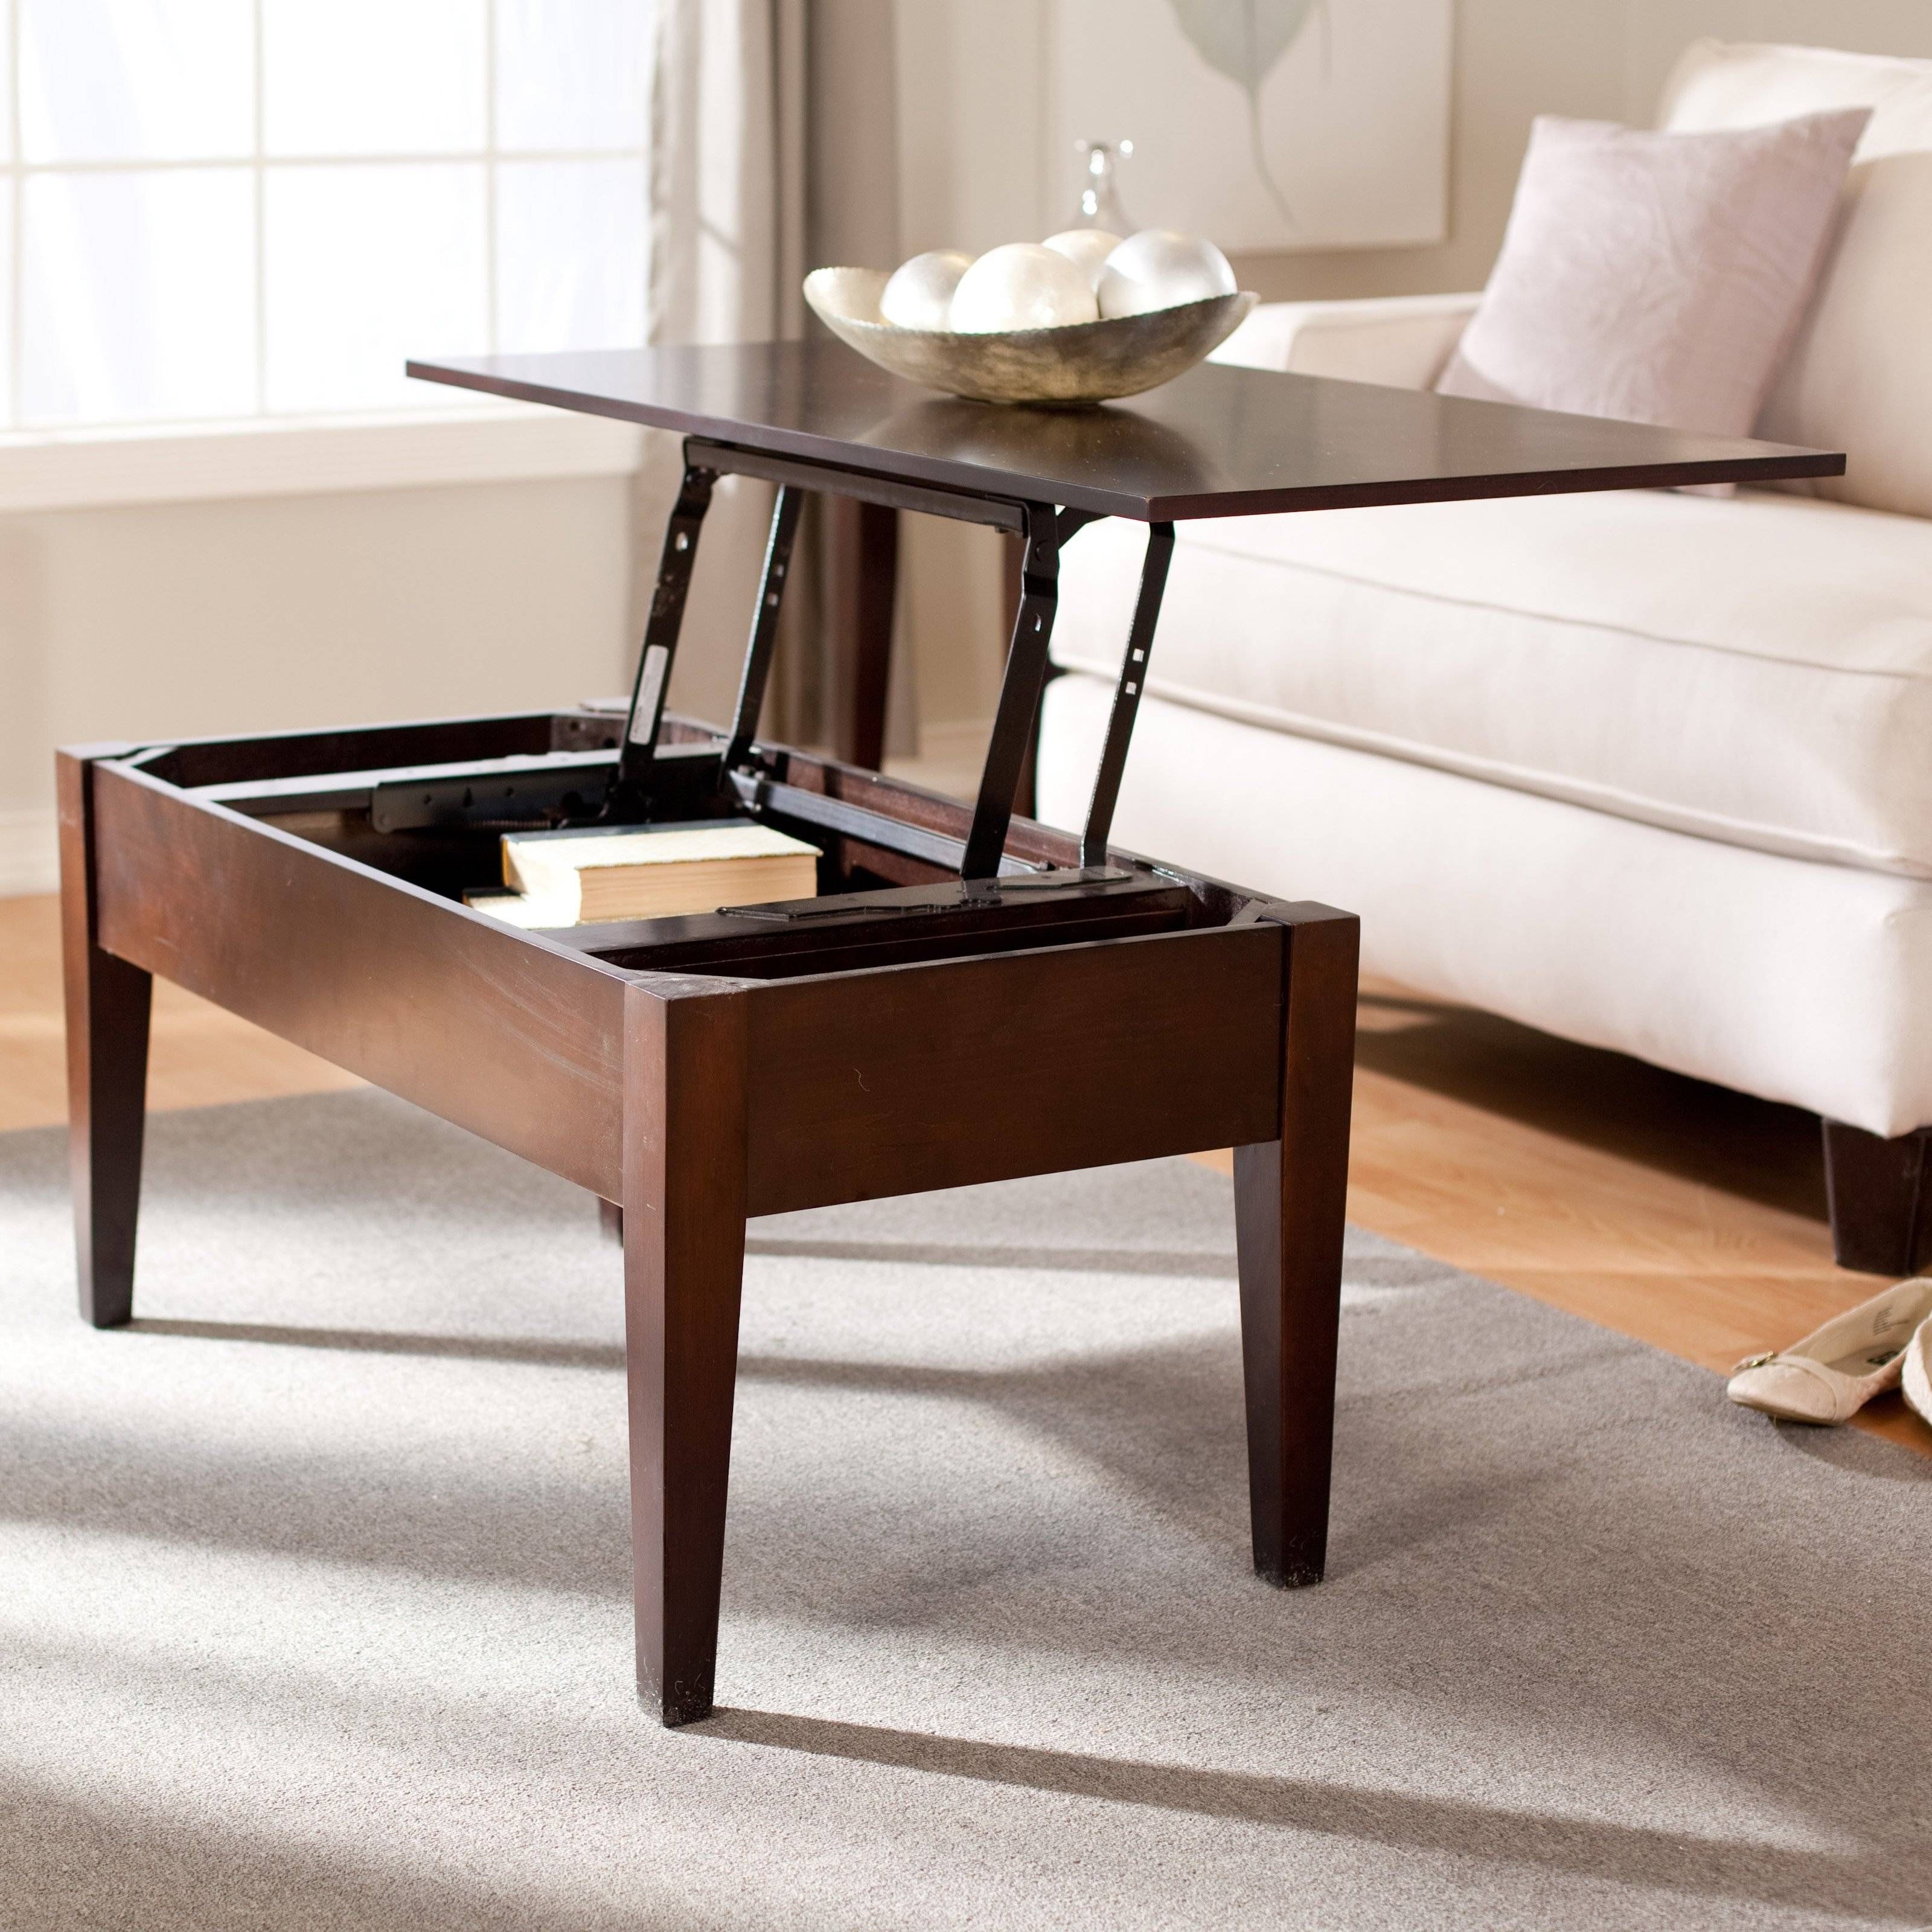 Turner Lift Top Coffee Table – Black | Hayneedle Intended For Desk Coffee Tables (View 9 of 30)